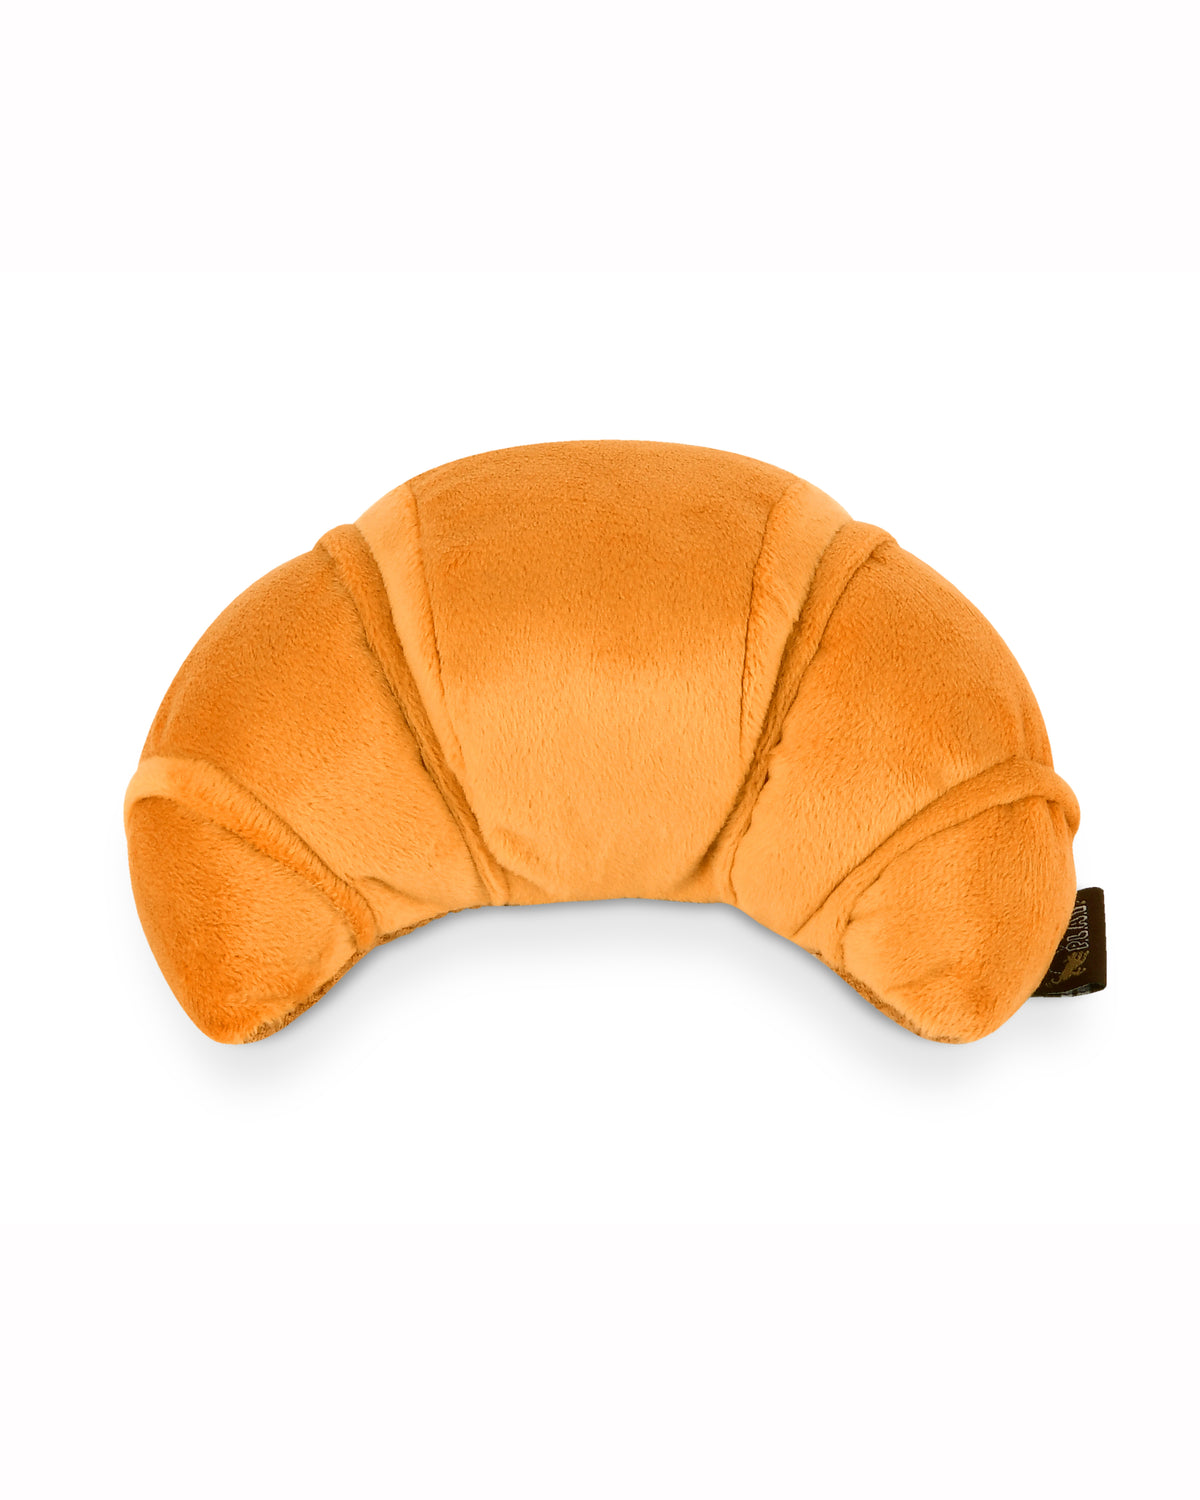 1 Simulated Croissant Plush Squeaky Cat And Dog Toy